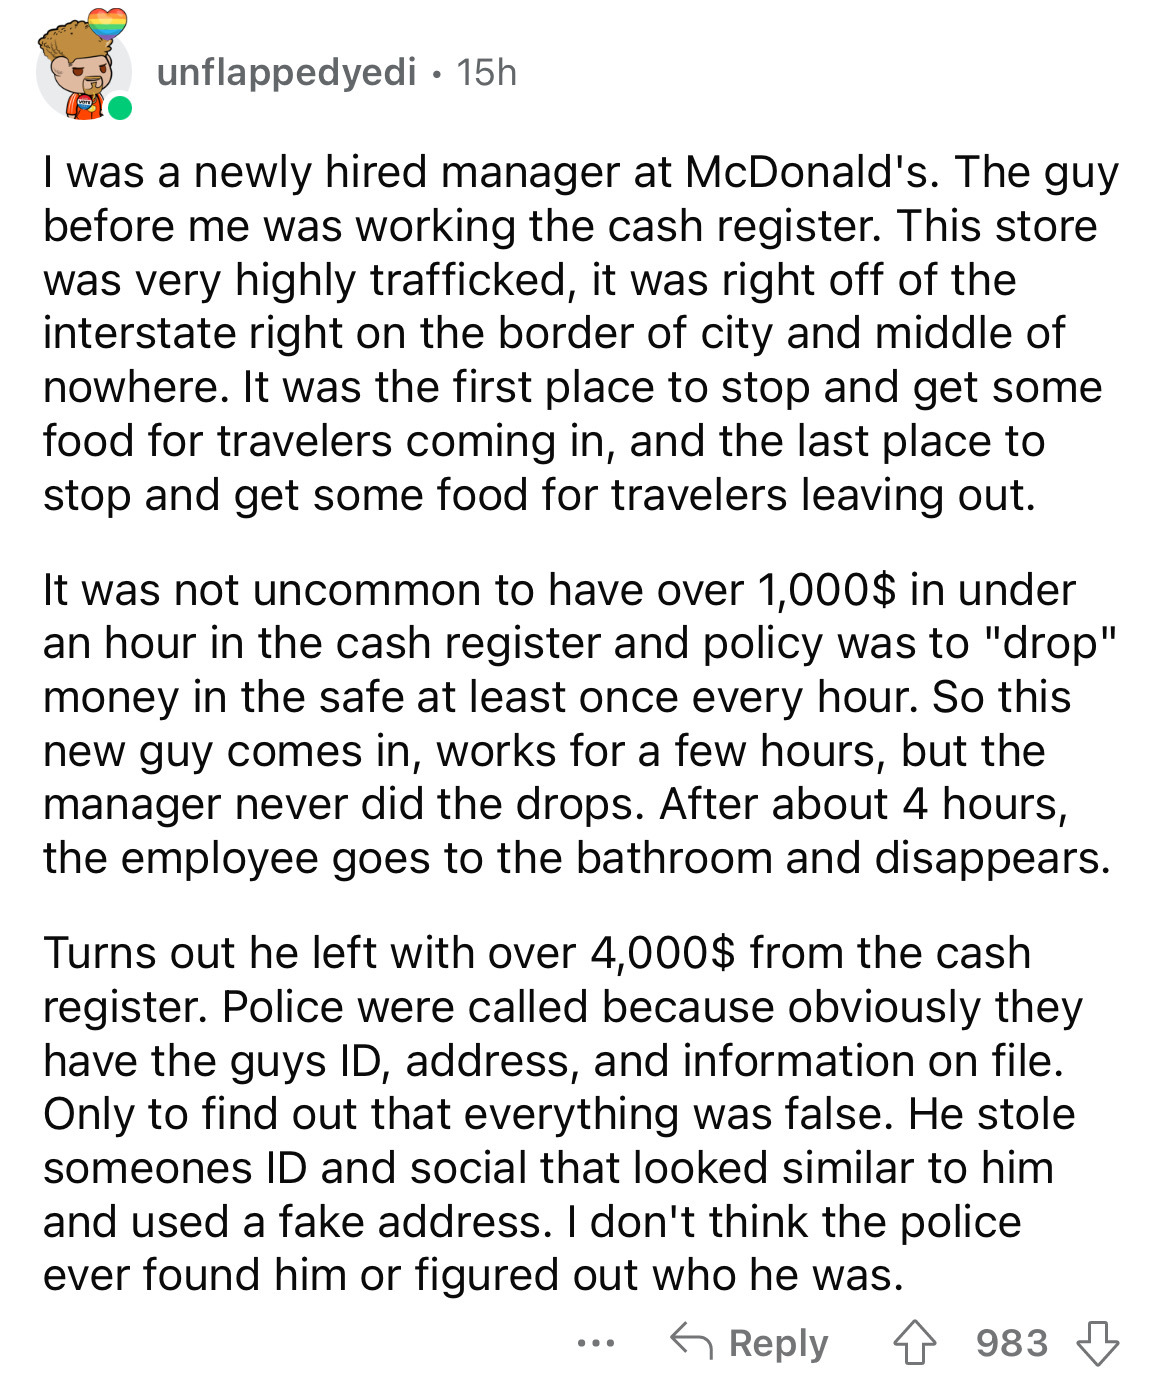 document - unflappedyedi 15h I was a newly hired manager at McDonald's. The guy before me was working the cash register. This store was very highly trafficked, it was right off of the interstate right on the border of city and middle of nowhere. It was th